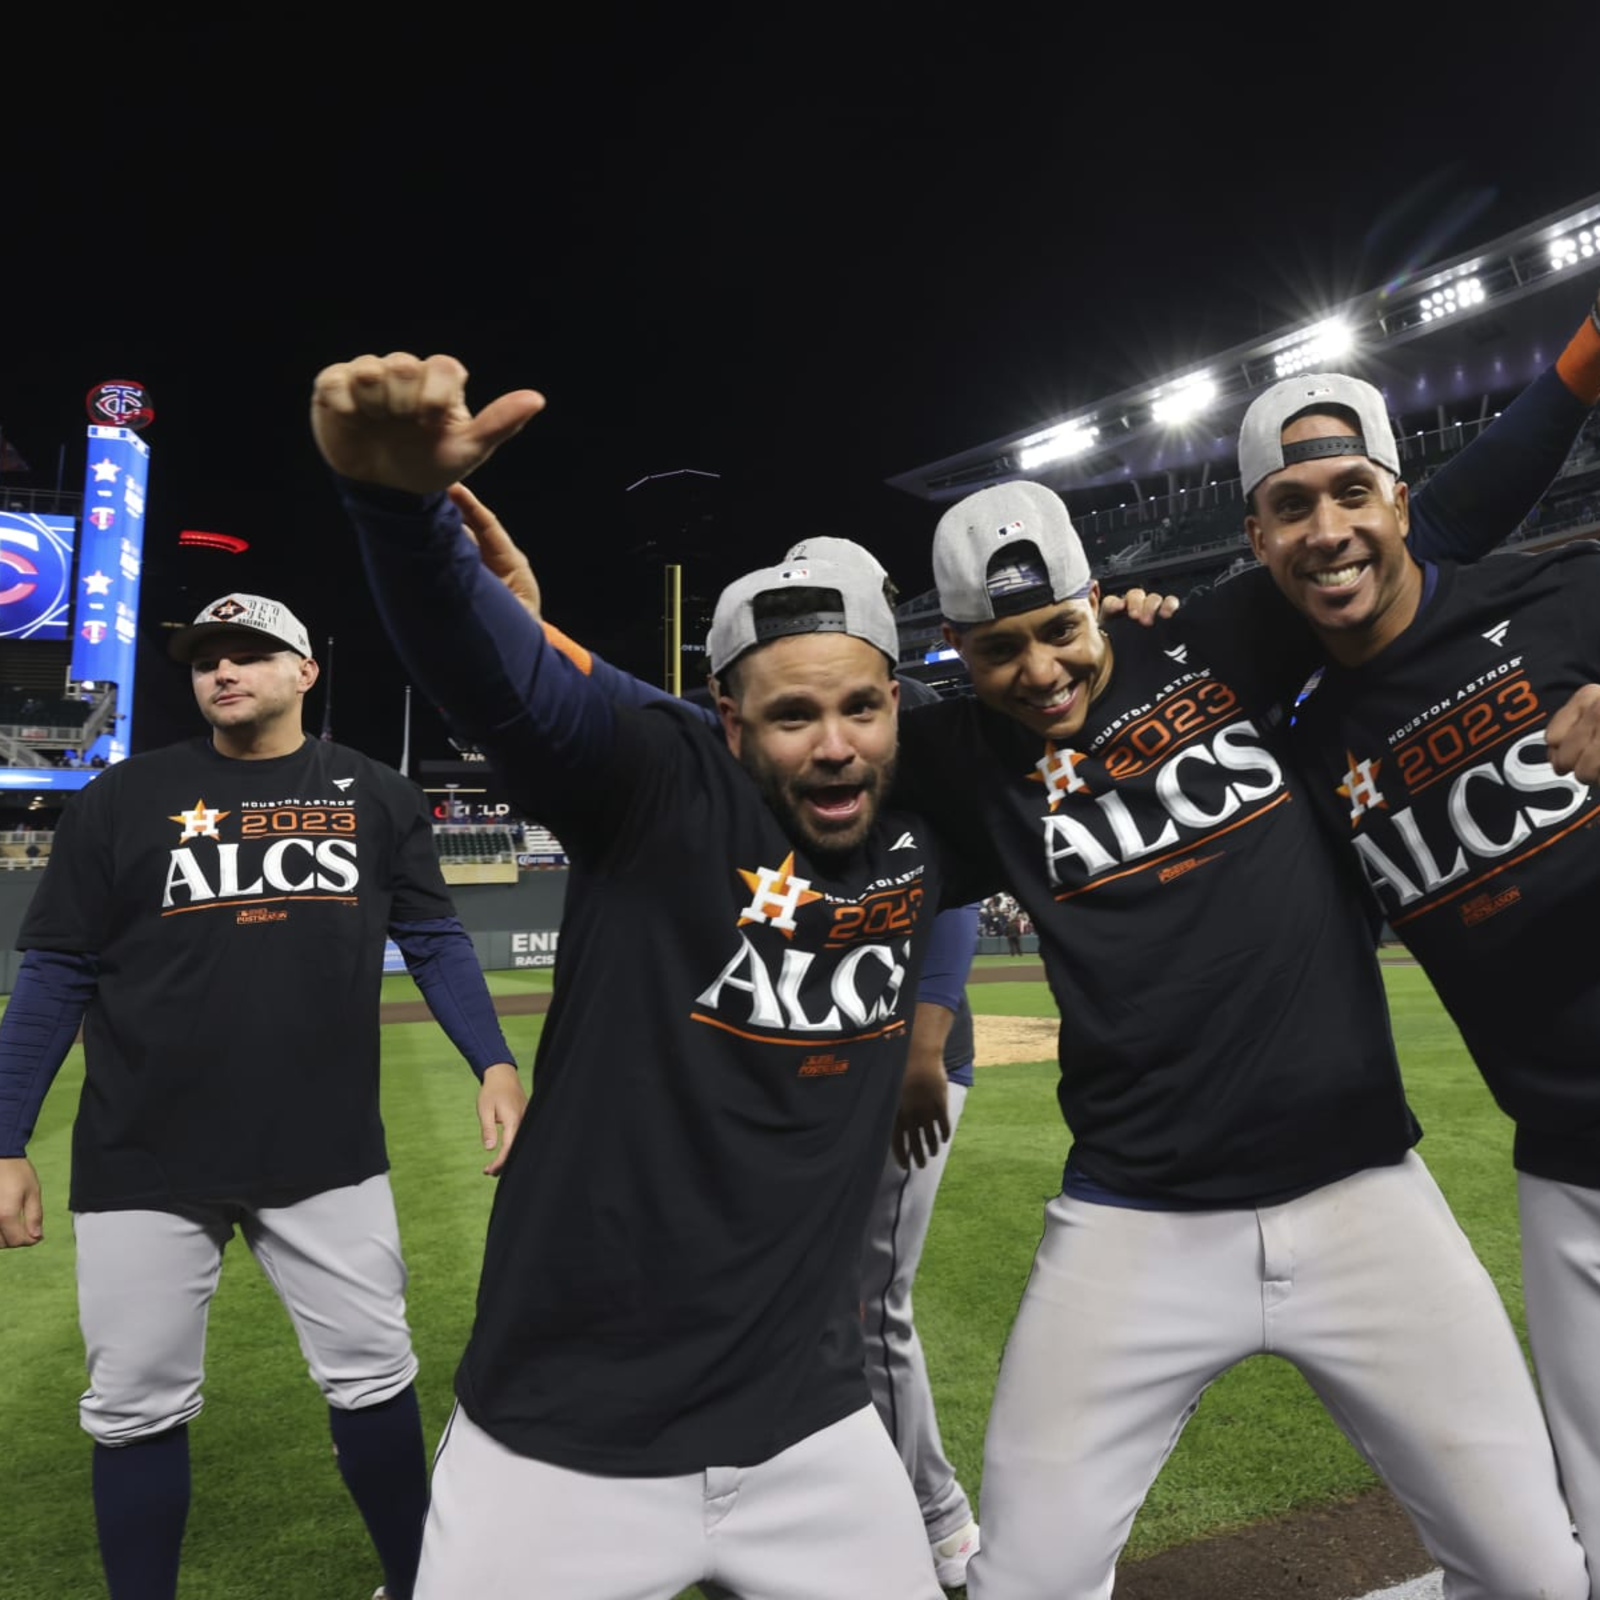 Academy selling official Houston Astros AL Championship apparel immediately  following Game 7 clinch